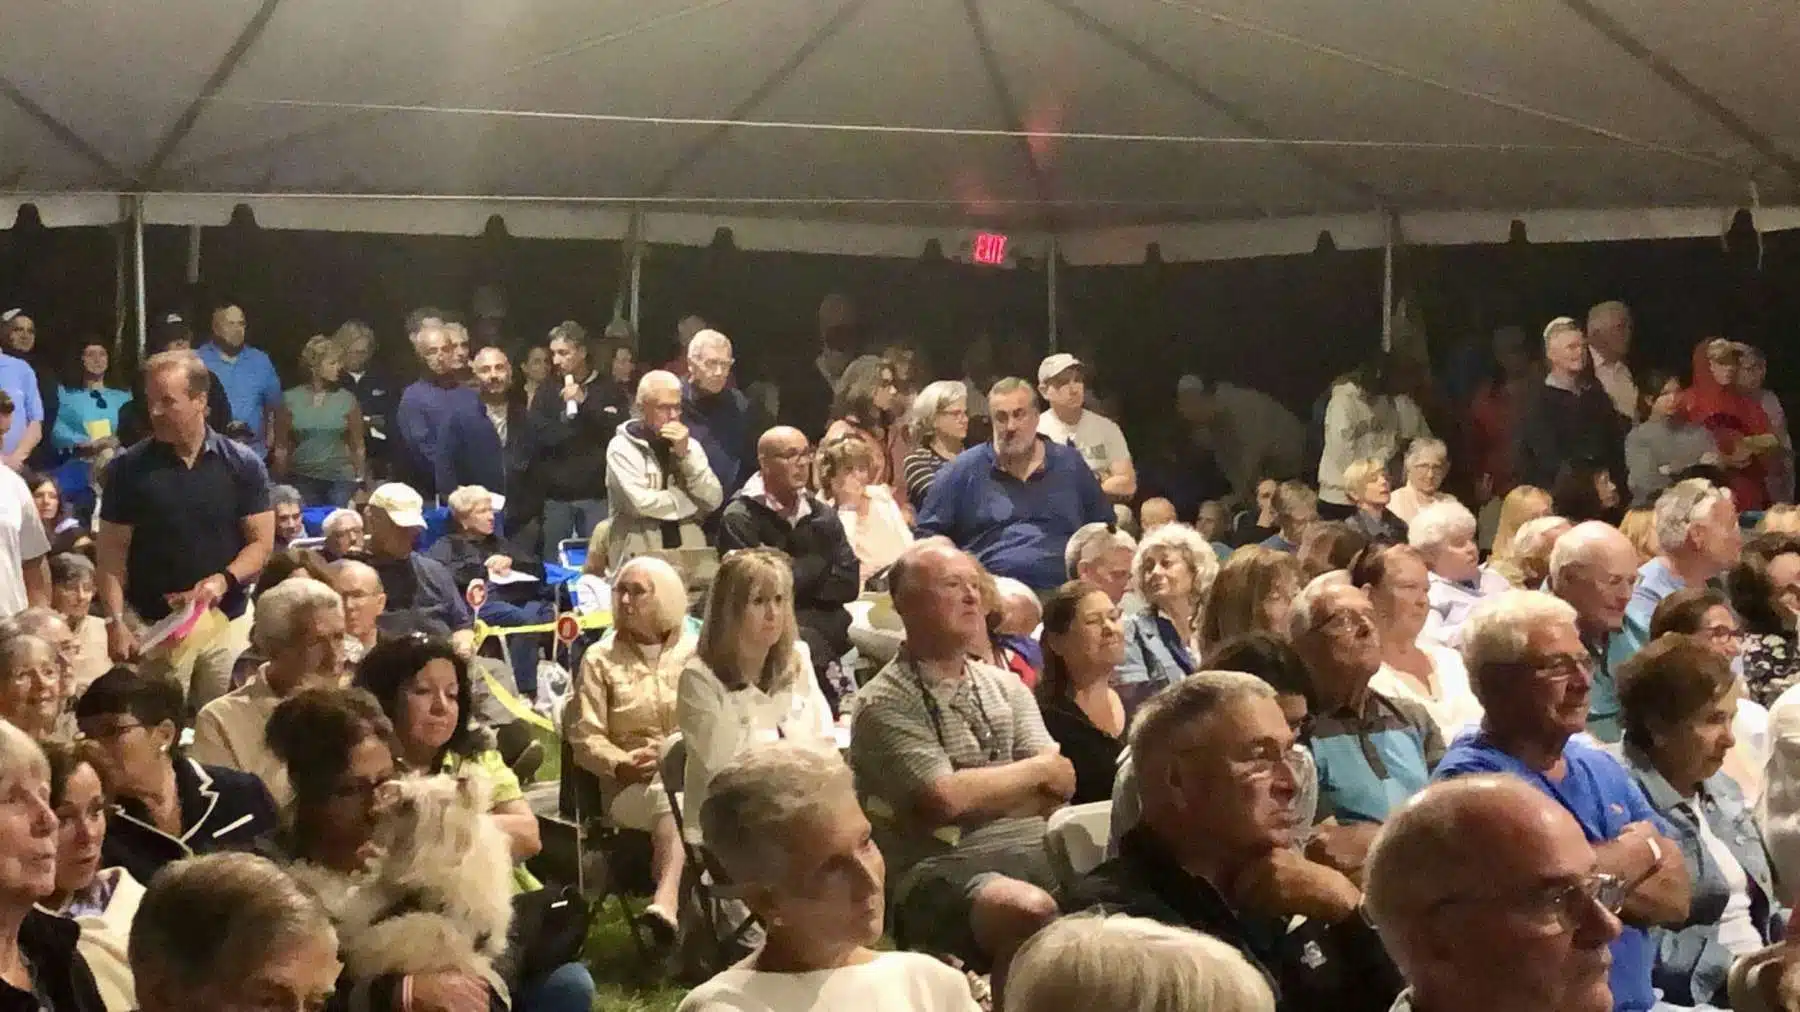 Bonnet Shores Fire District election night: Tradition, Swamp Yankees and archaic voting laws